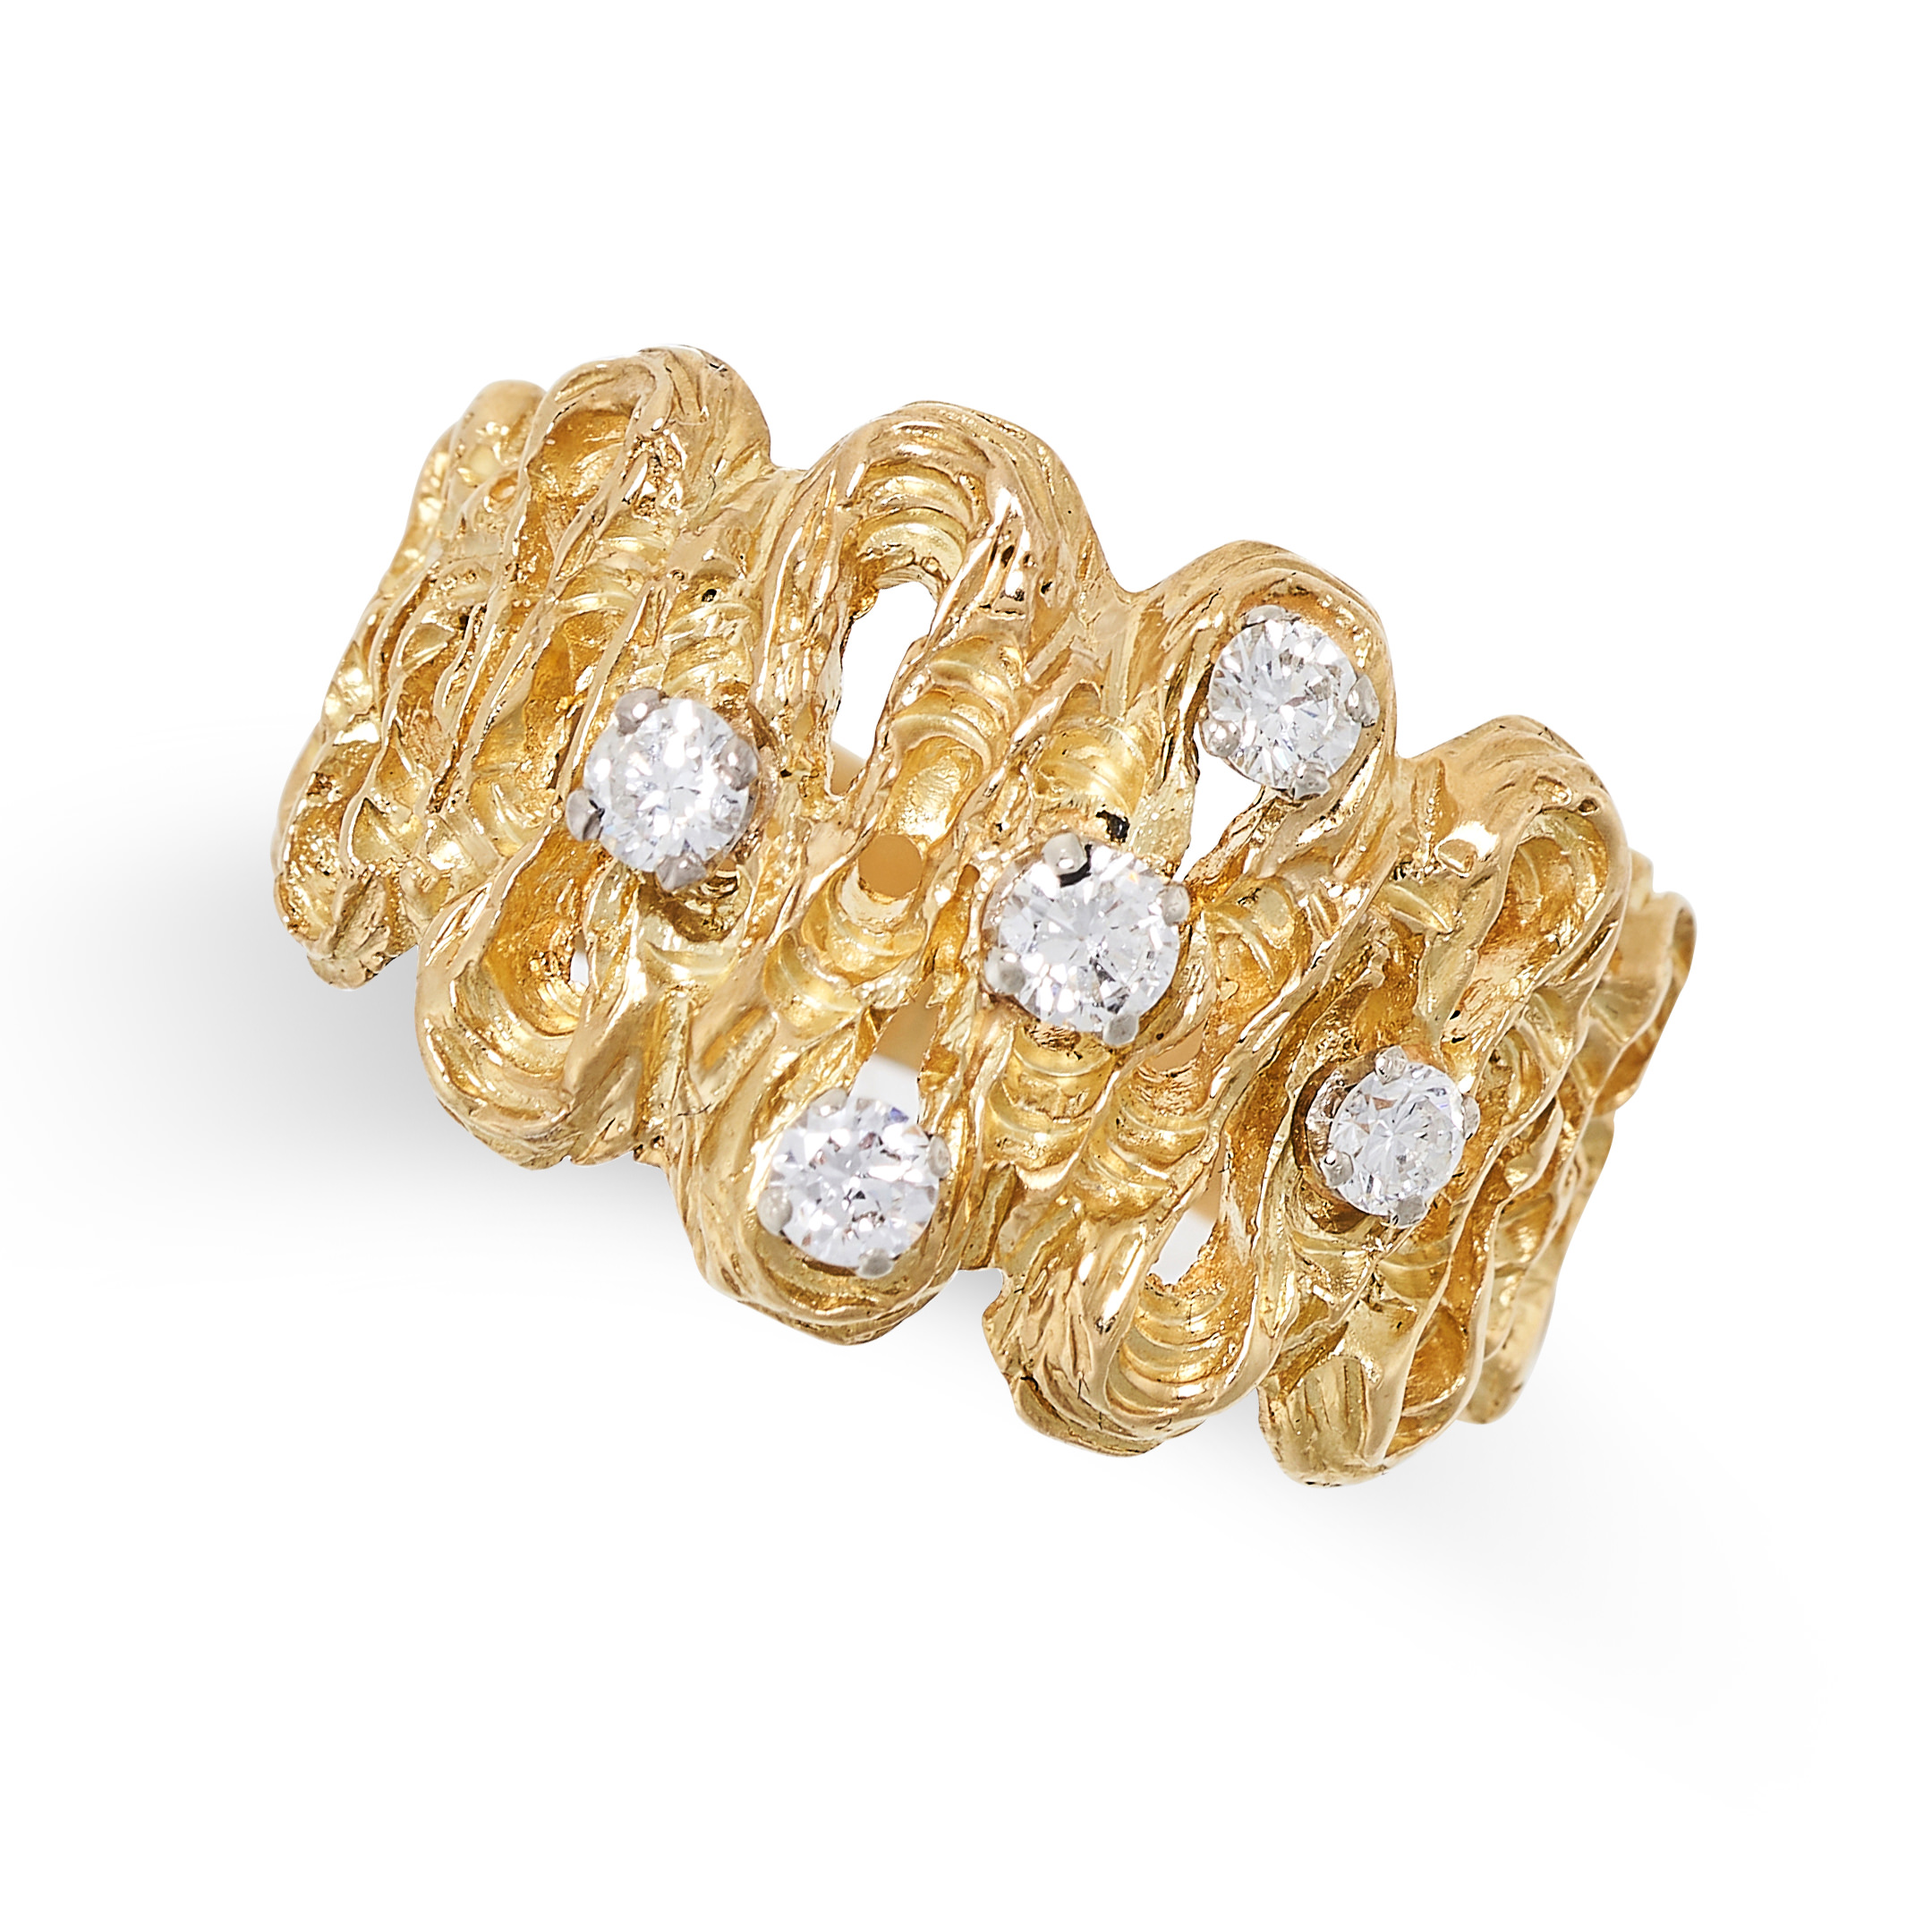 A DIAMOND DRESS RING in yellow gold, in abstract design, set with five round brilliant cut